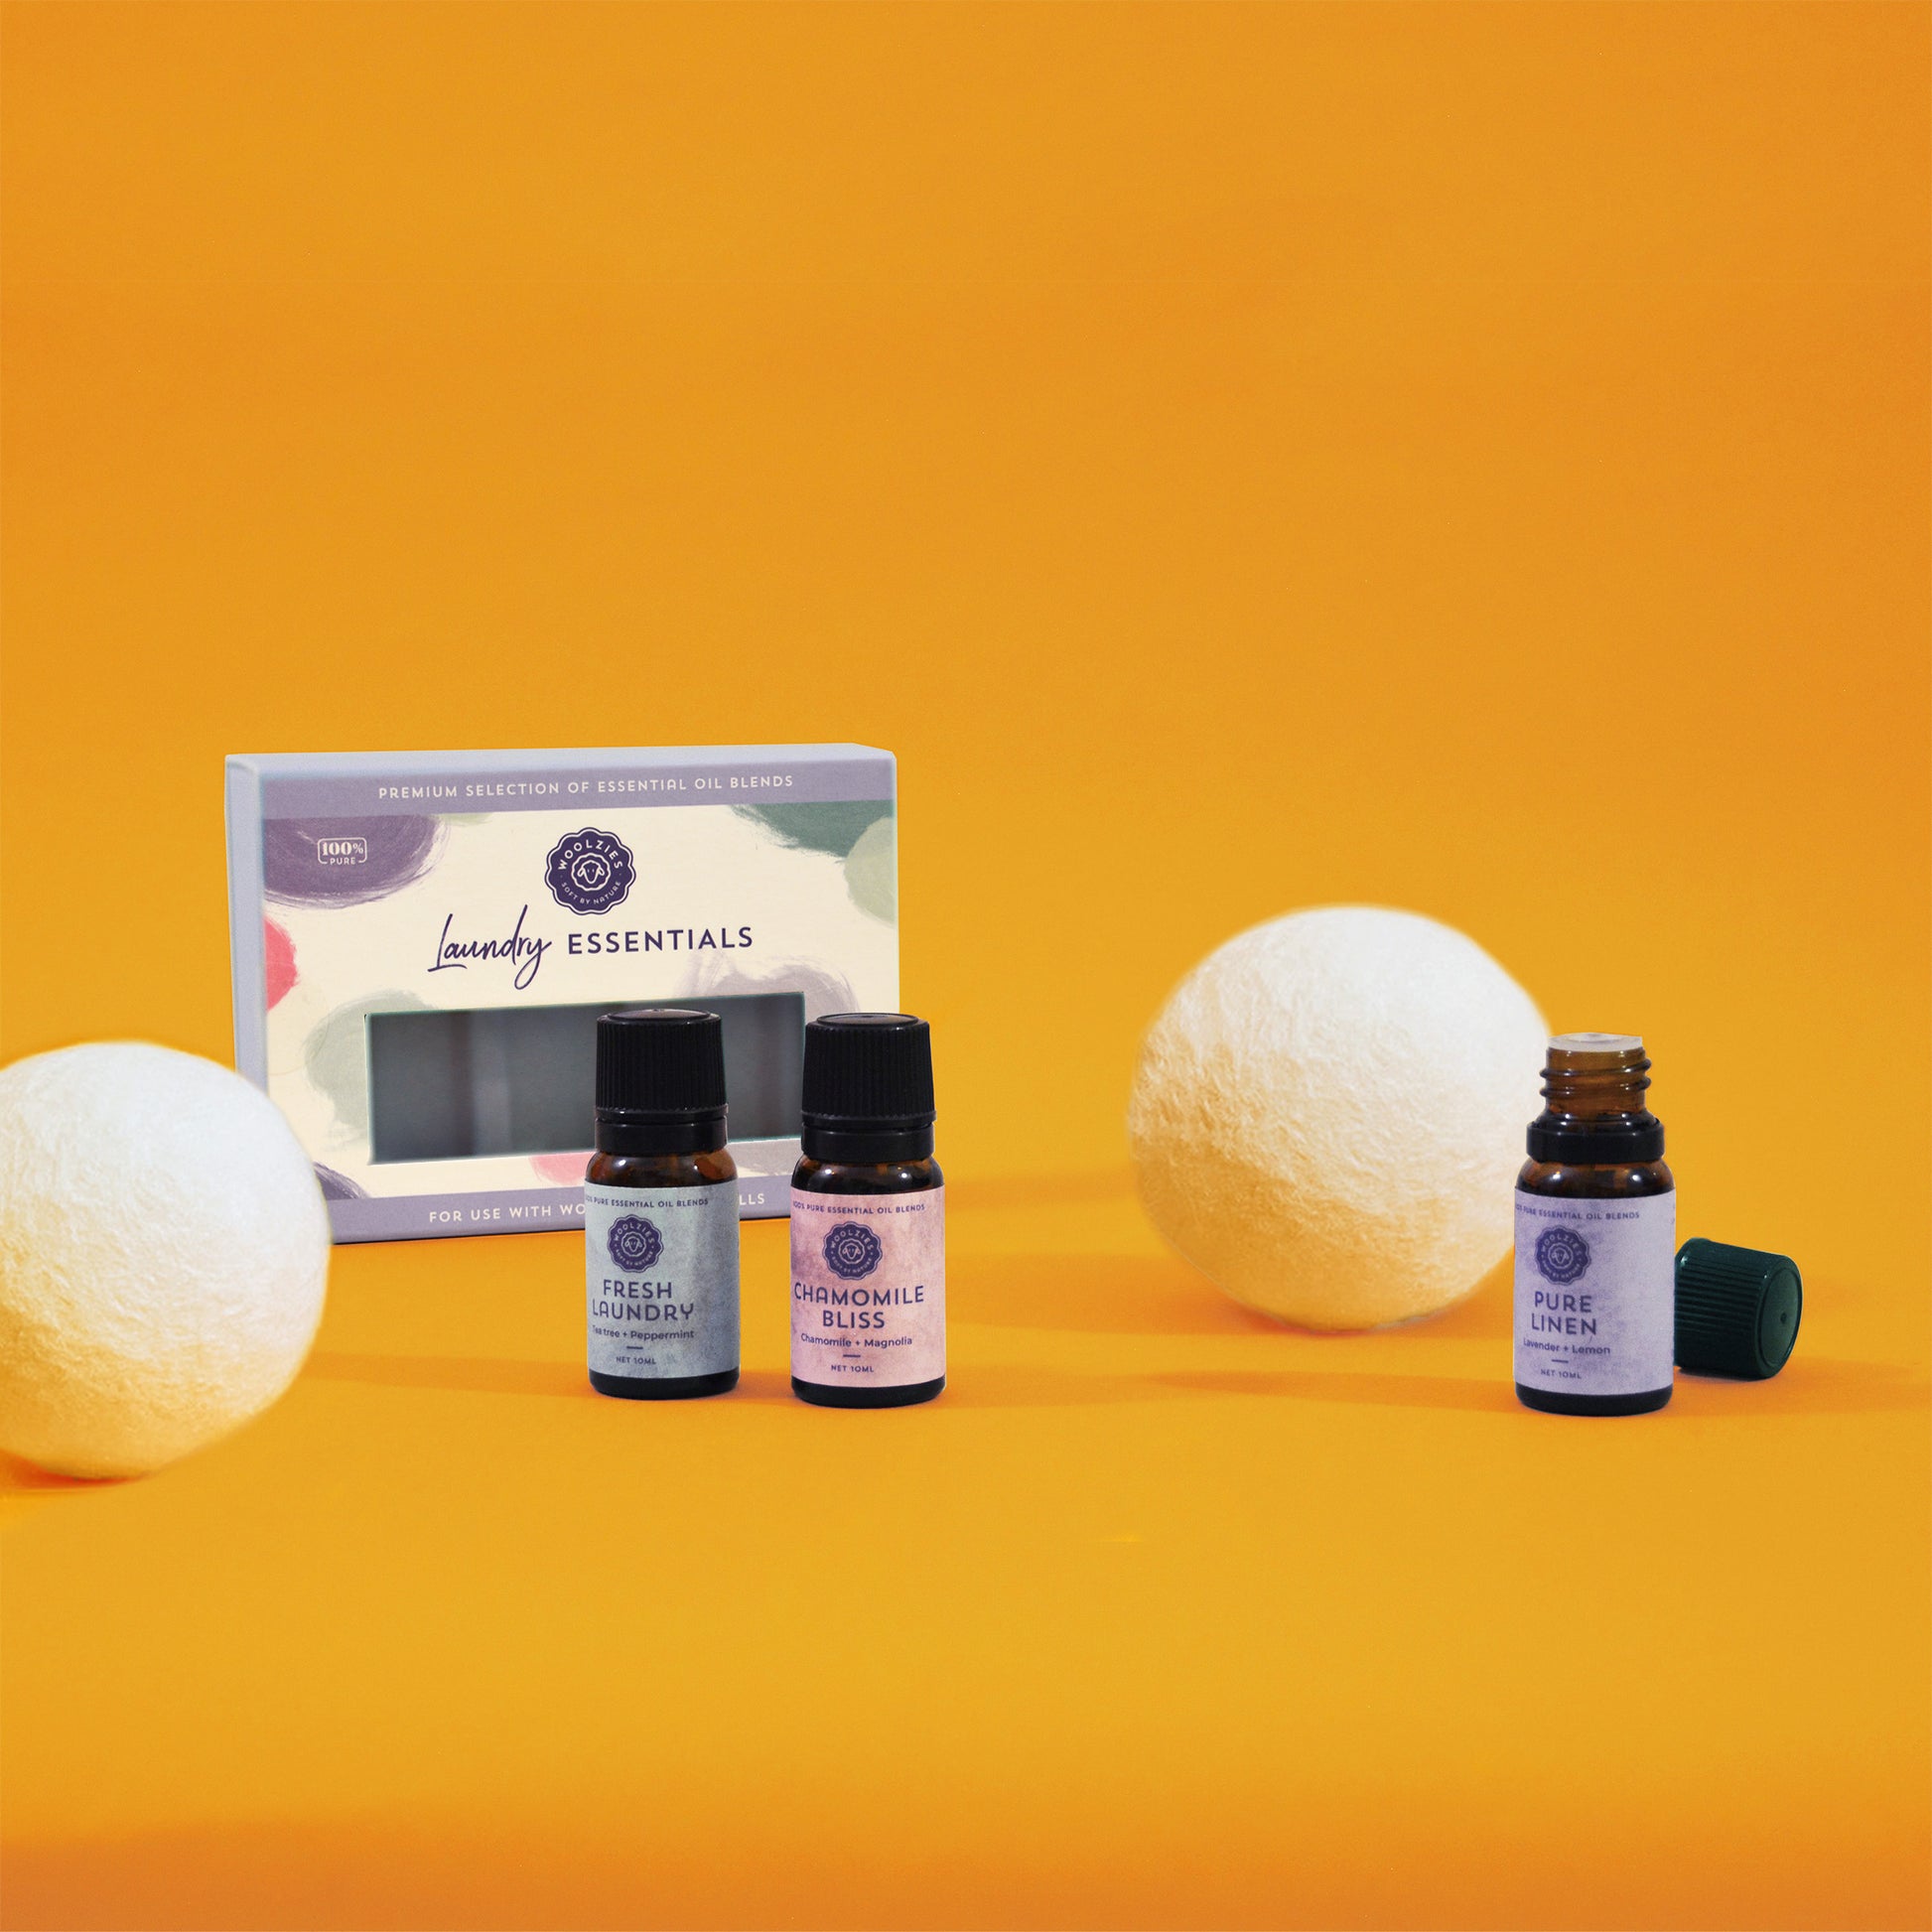 How to Use Wool Dryer Balls with Essential Oils - Oily Chic  Essential  oils cleaning, Essential oil blends, Essential oils for laundry